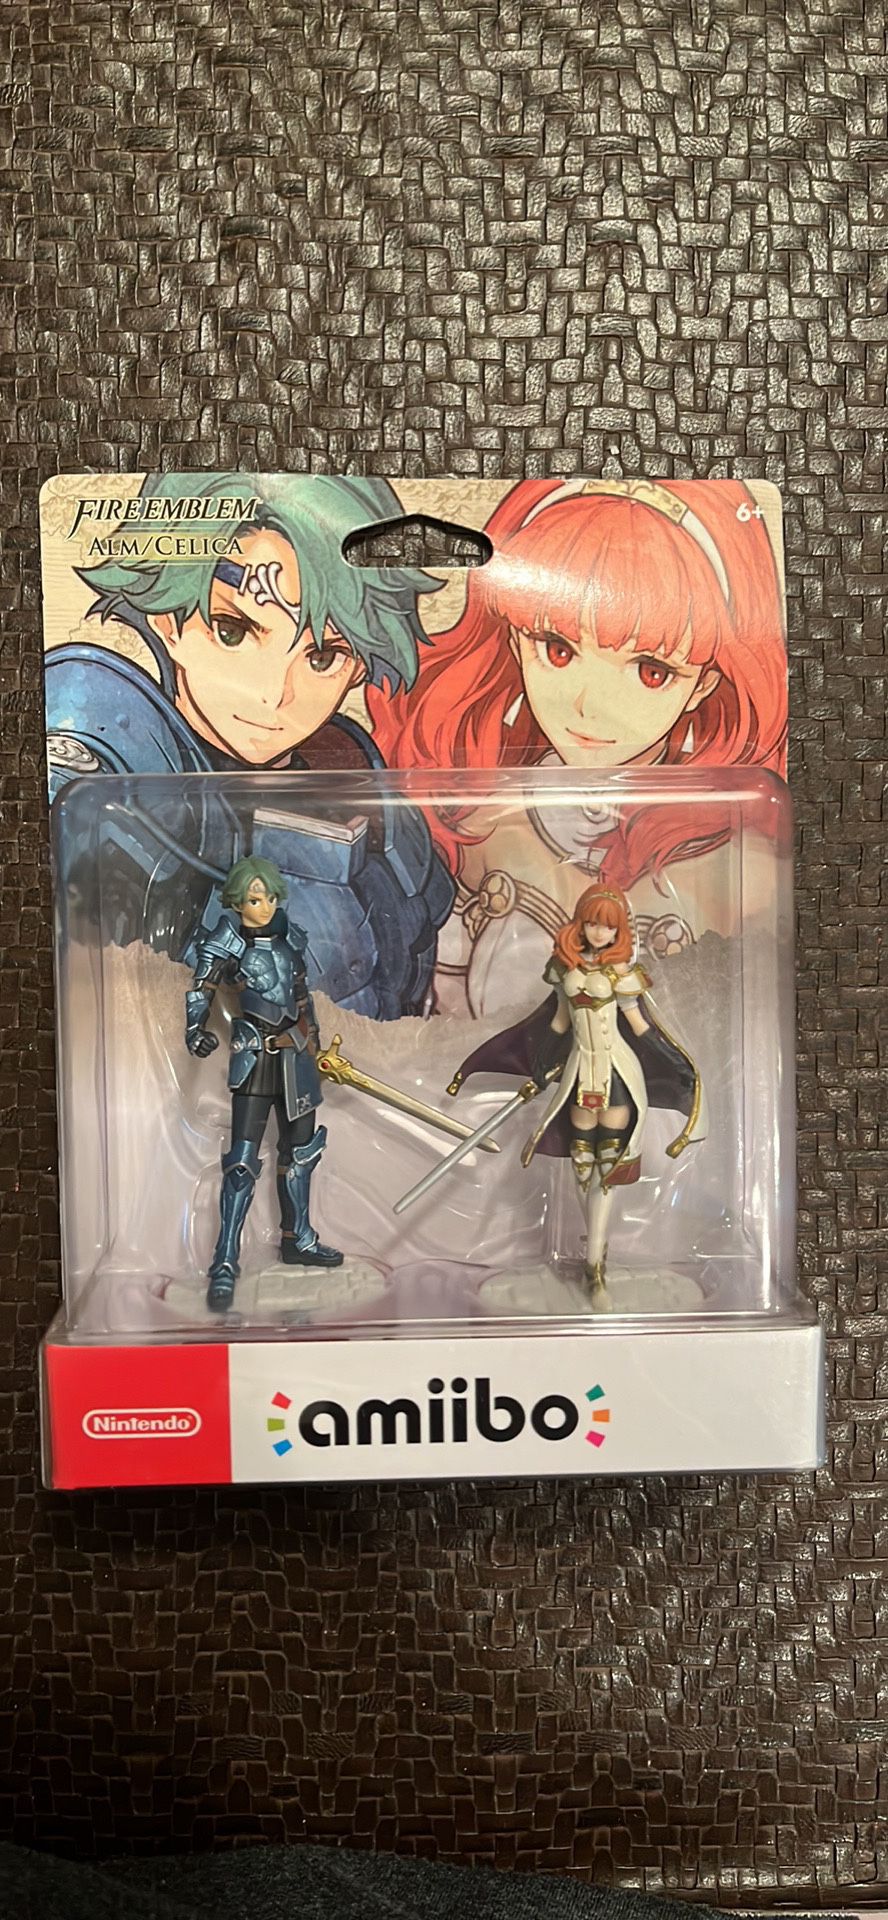 NEW Nintendo Fire Emblem Alm and Celica Amiibo Figure 2 Pack Factory Sealed